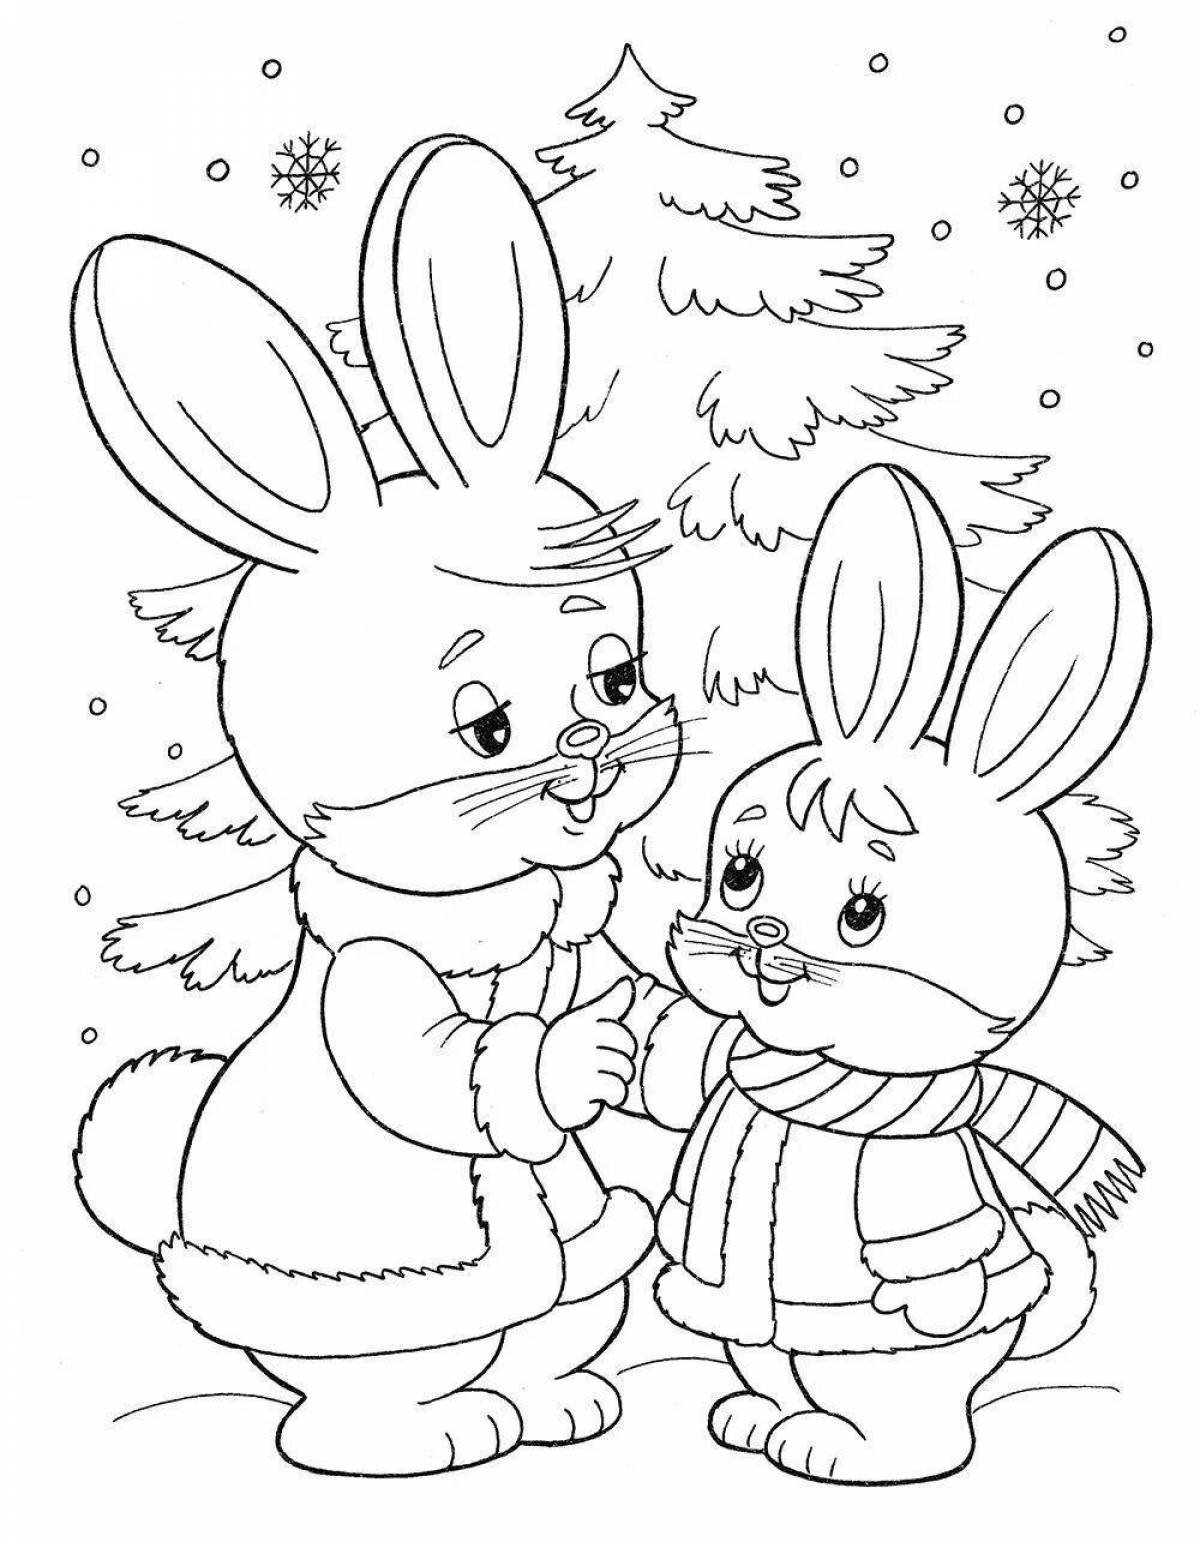 Coloring page charming hare